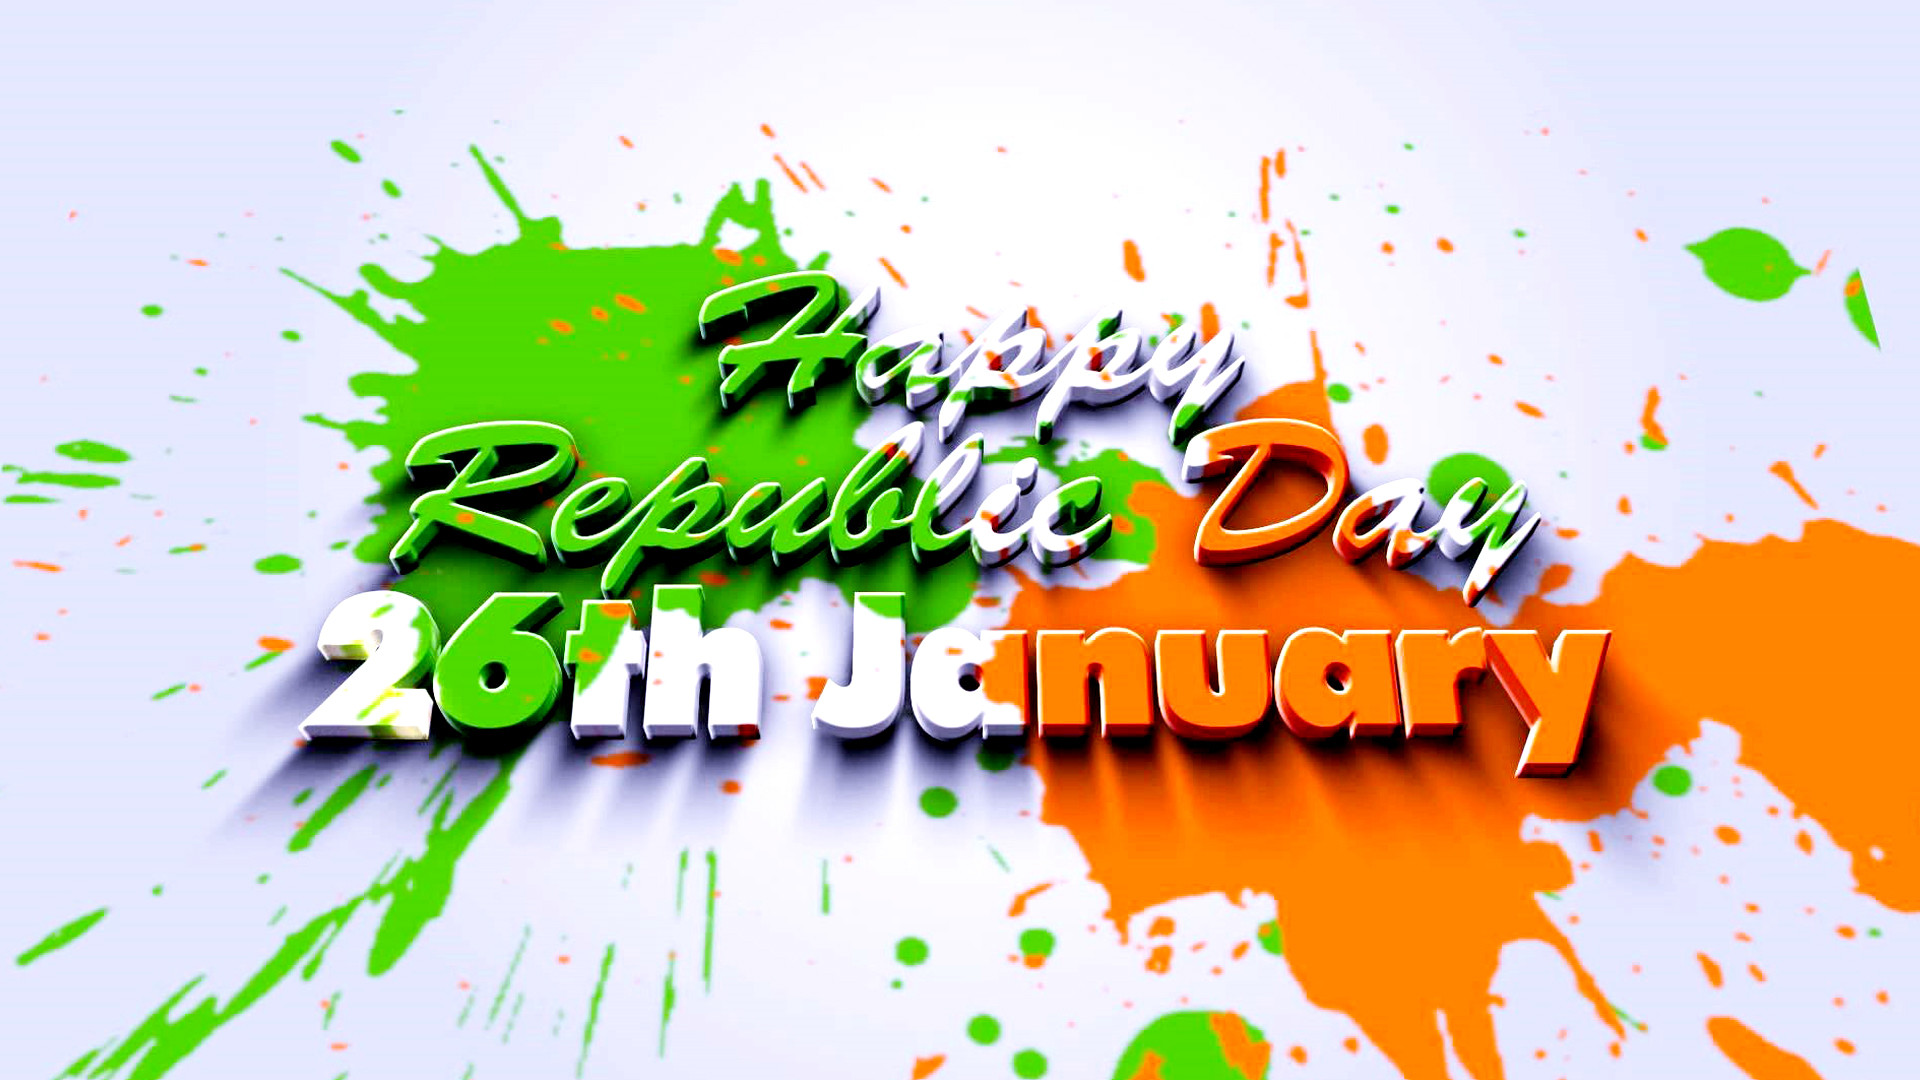 1920x1080 ... Free Download of Republic Day 2017, 2018, 2019, 2020 Wallpaper with  Abstract Tricolor